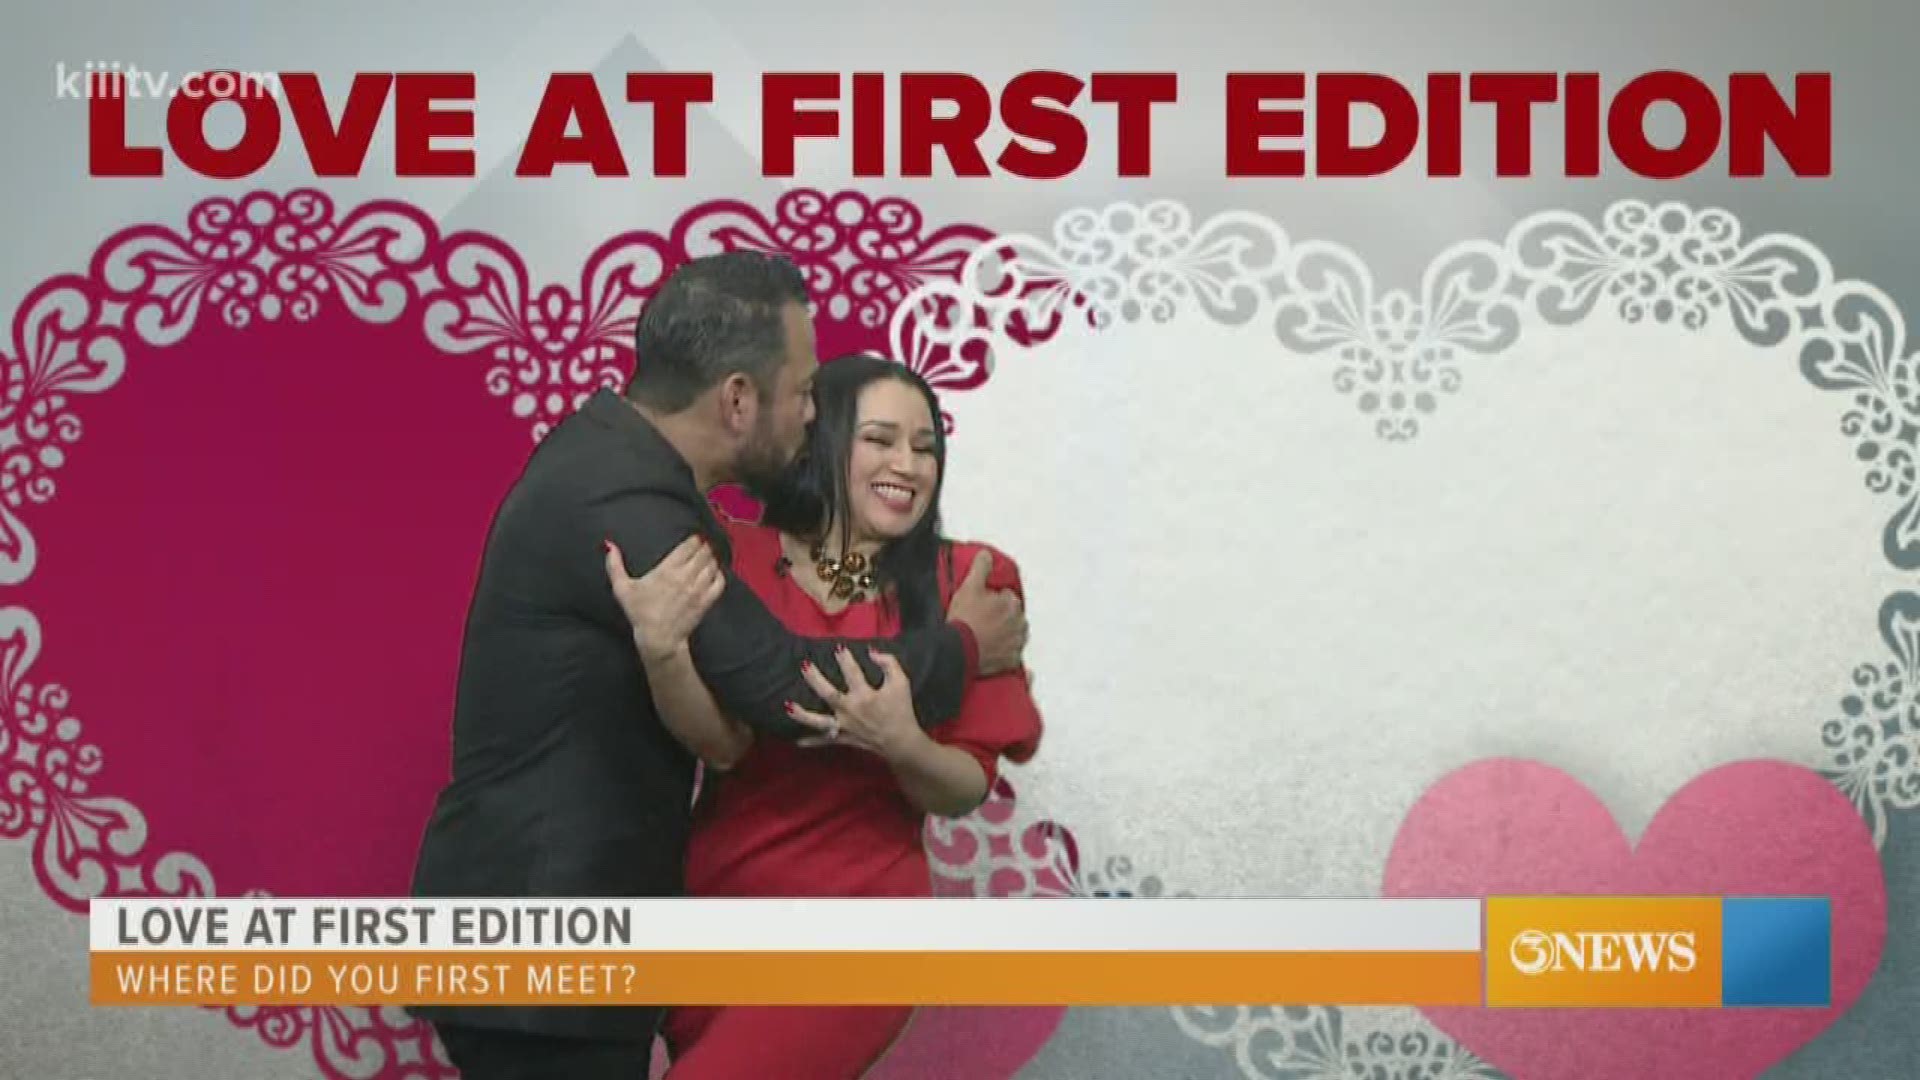 The 3News First Edition crew invited their significant others to the station to test their love knowledge in a segment called "Love at First Edition".